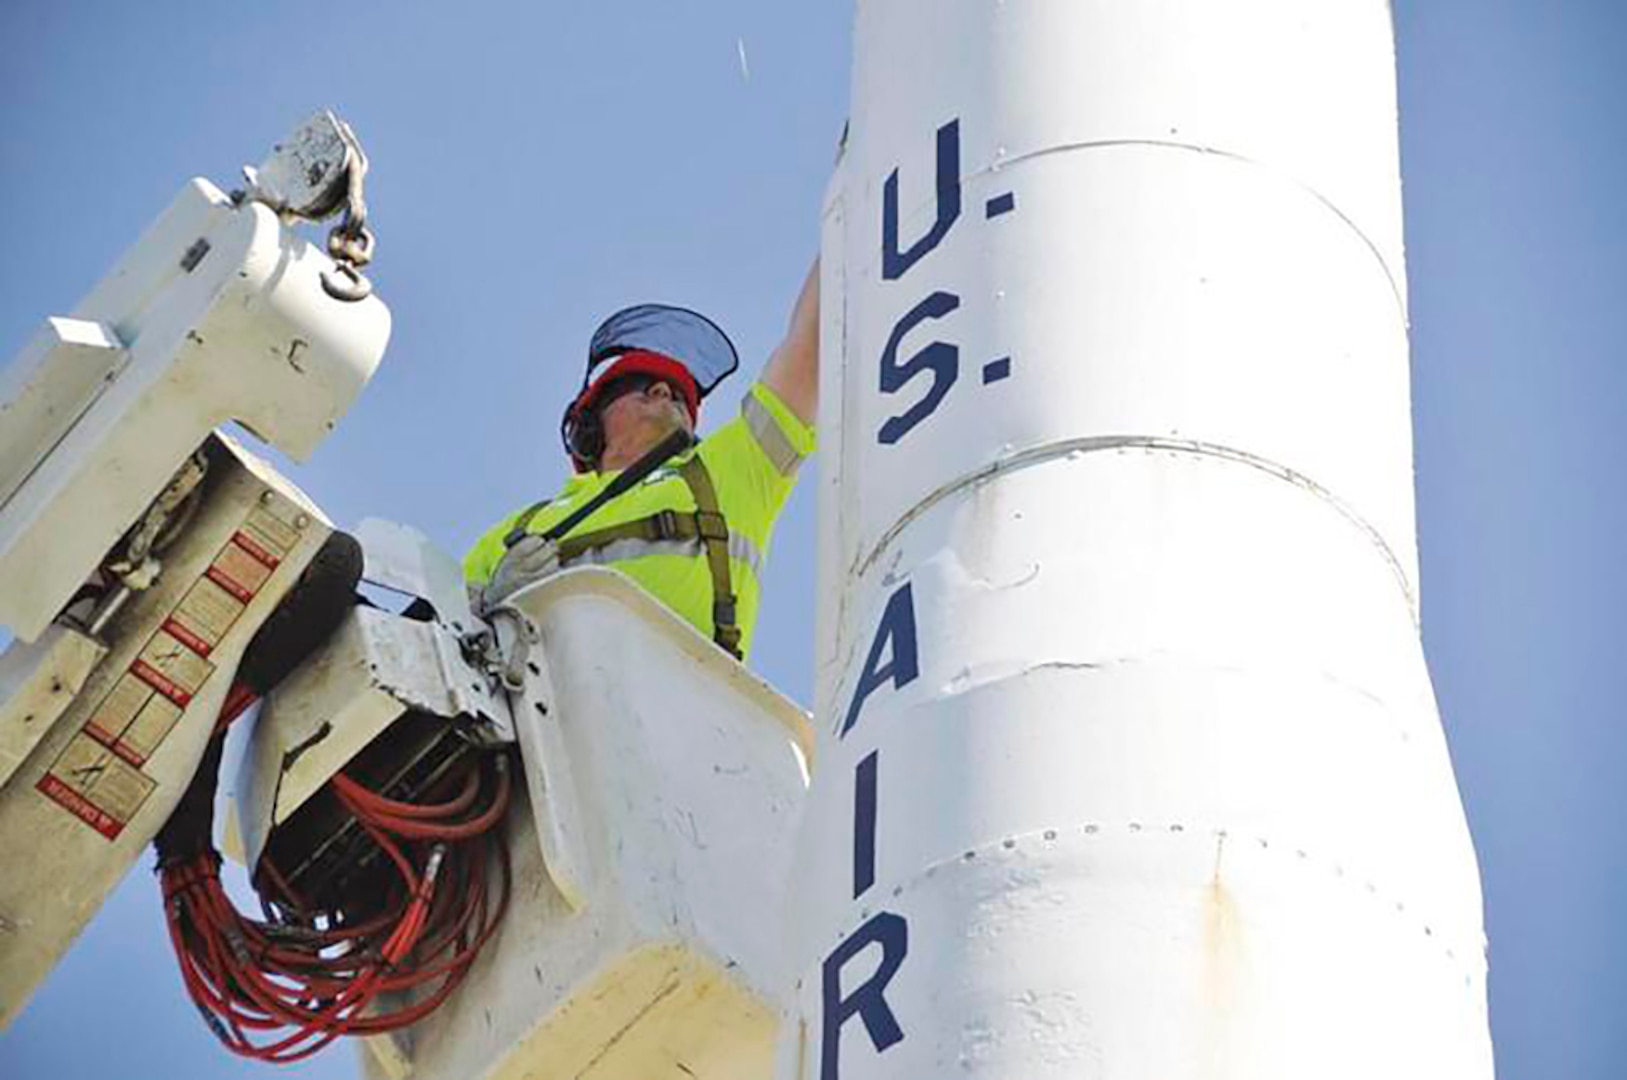 A man in a bucket pole examines an old missile.